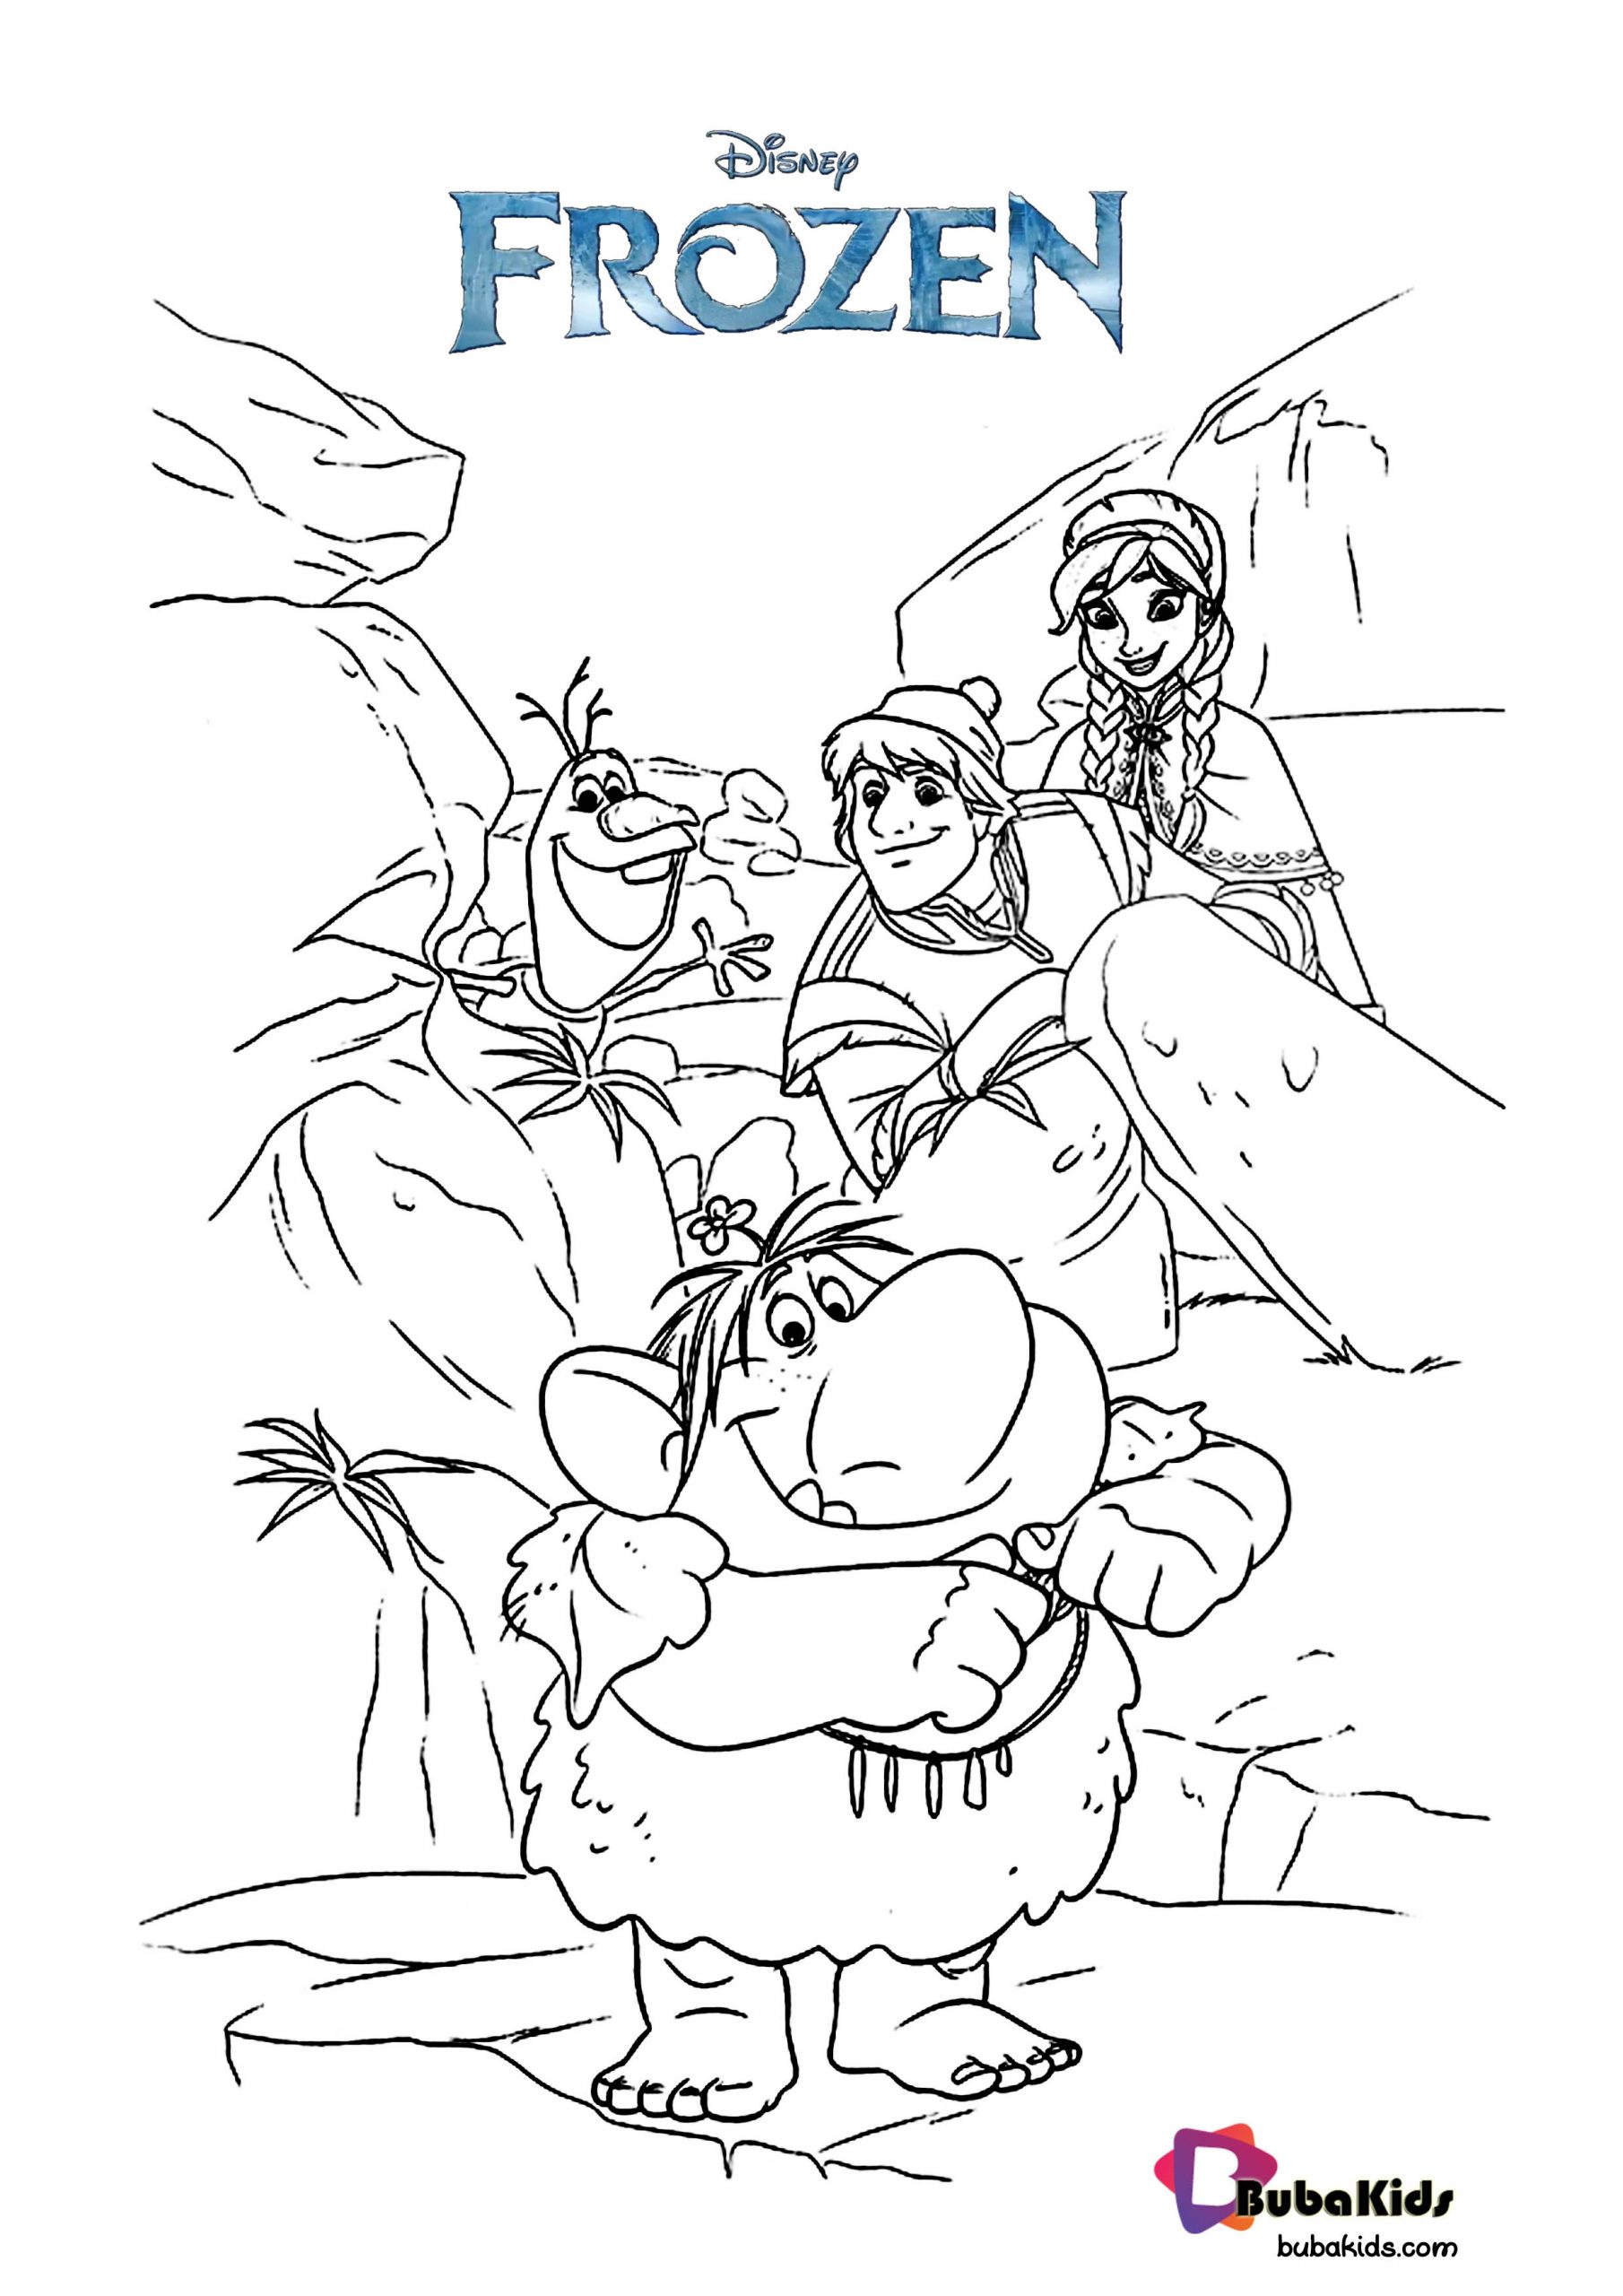 Magical Troll Disney Frozen Coloring Page